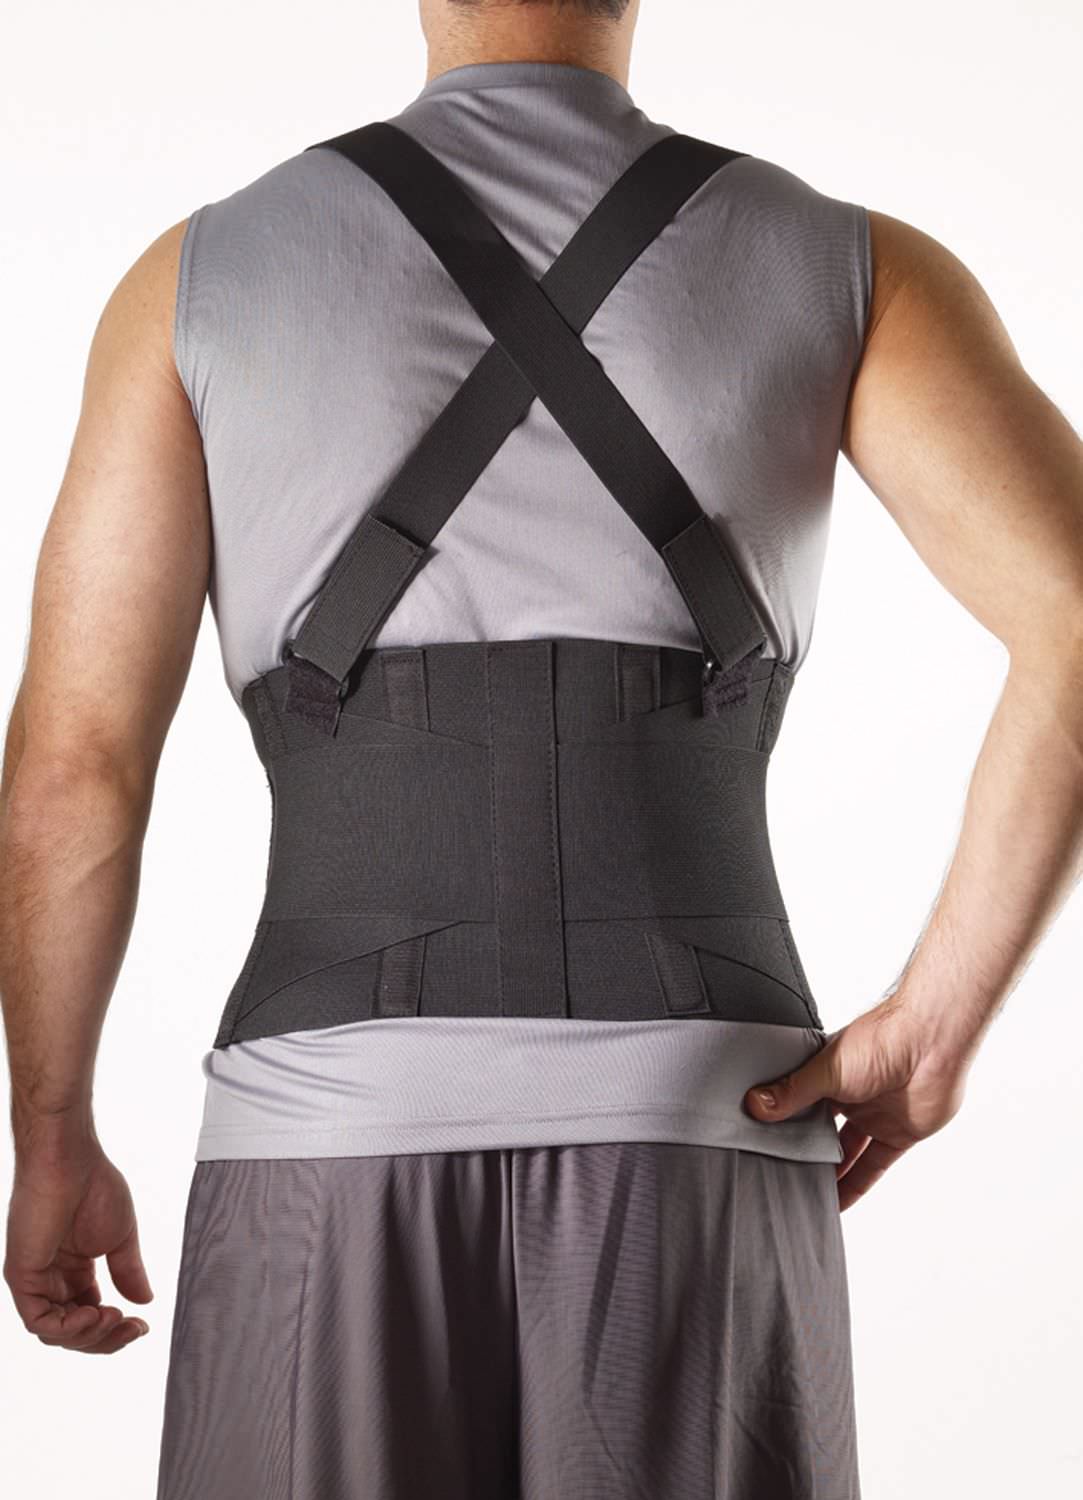 Lumbar support belt / with suspenders / with reinforcements 77-814, 77-915 Corflex